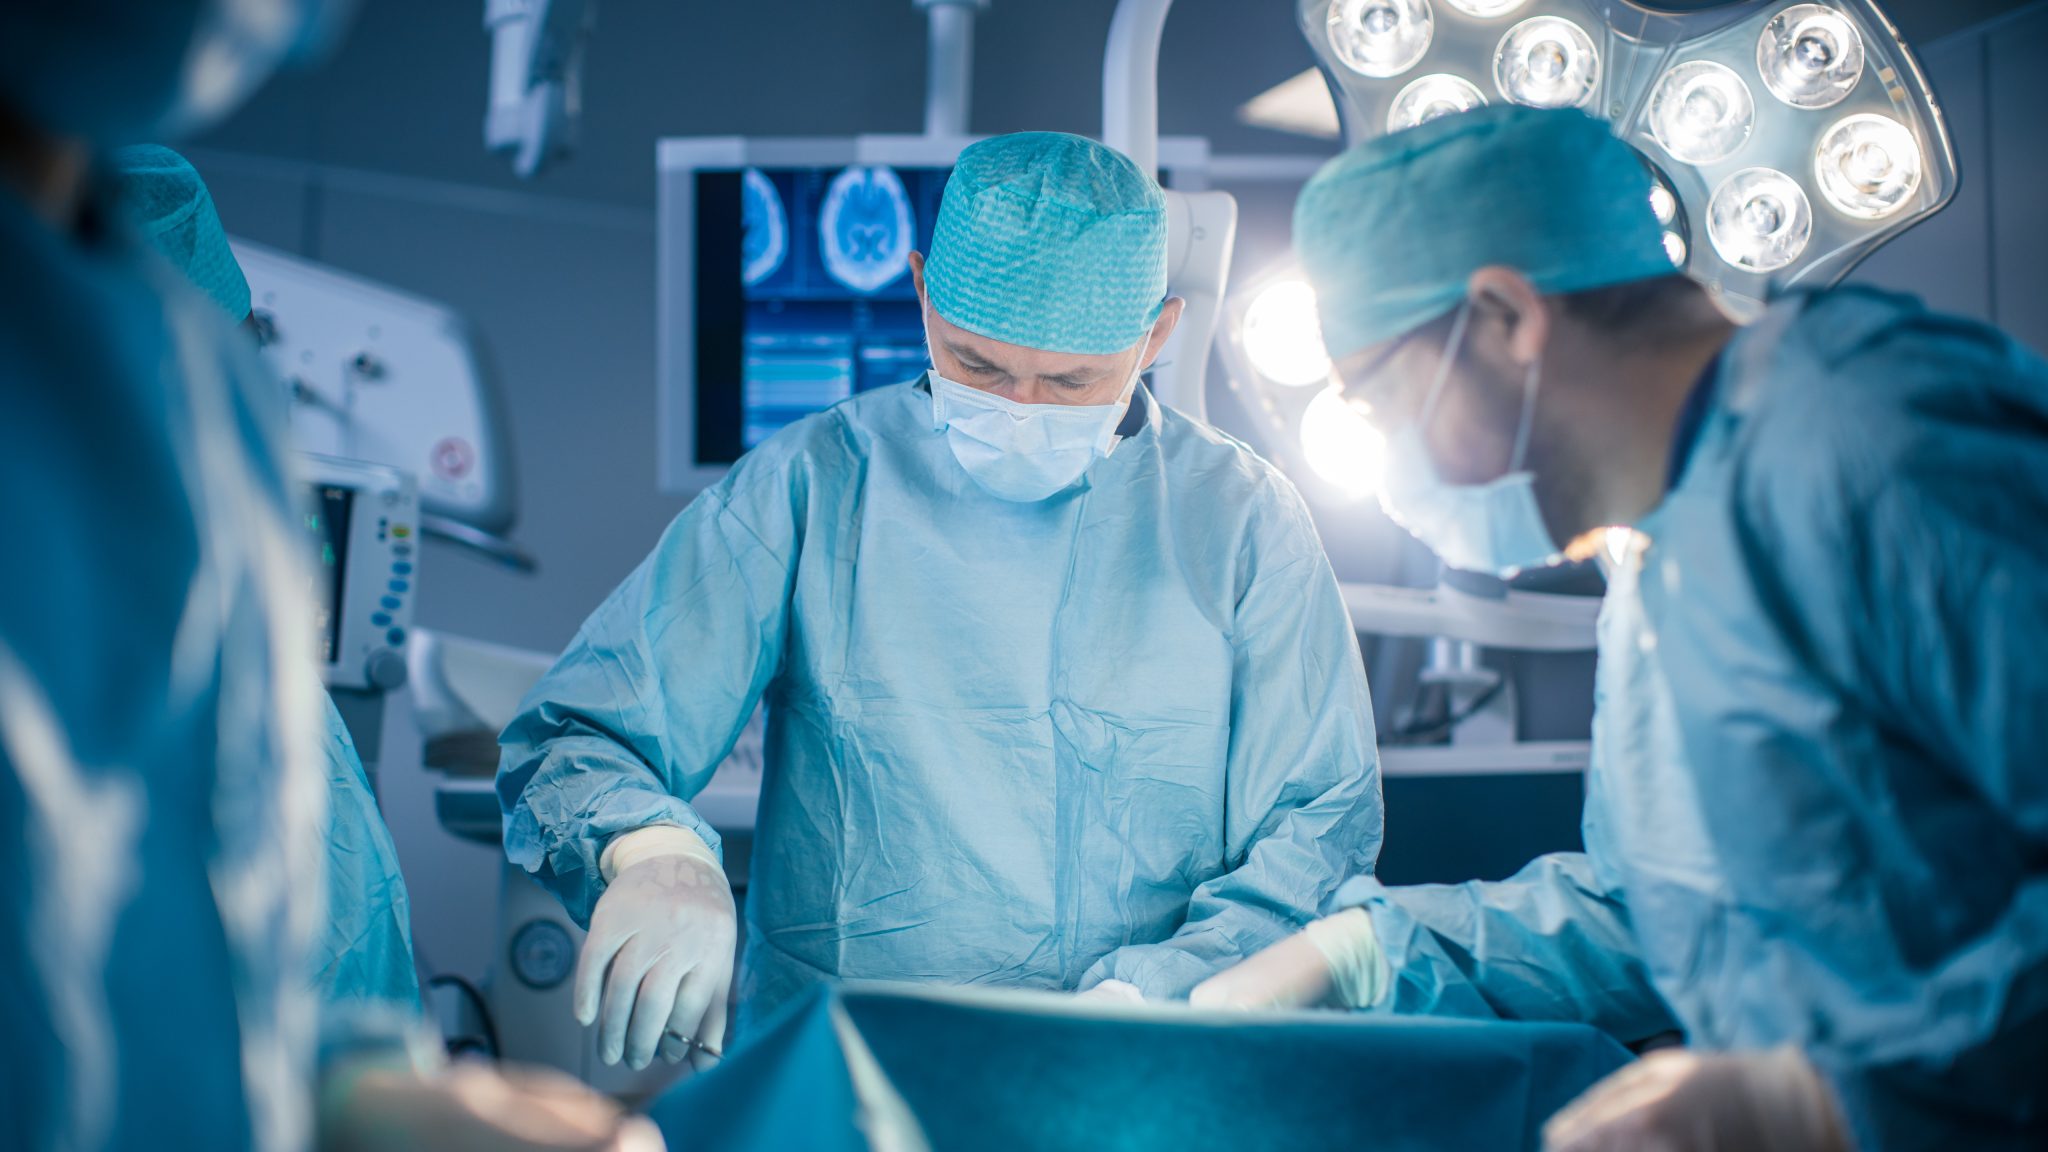 Diverse Team of Professional surgeon, Assistants and Nurses Performing Invasive Surgery on a Patient in the Hospital Operating Room. Surgeon Use Instruments. Real Modern Hospital with Authentic Equipment.